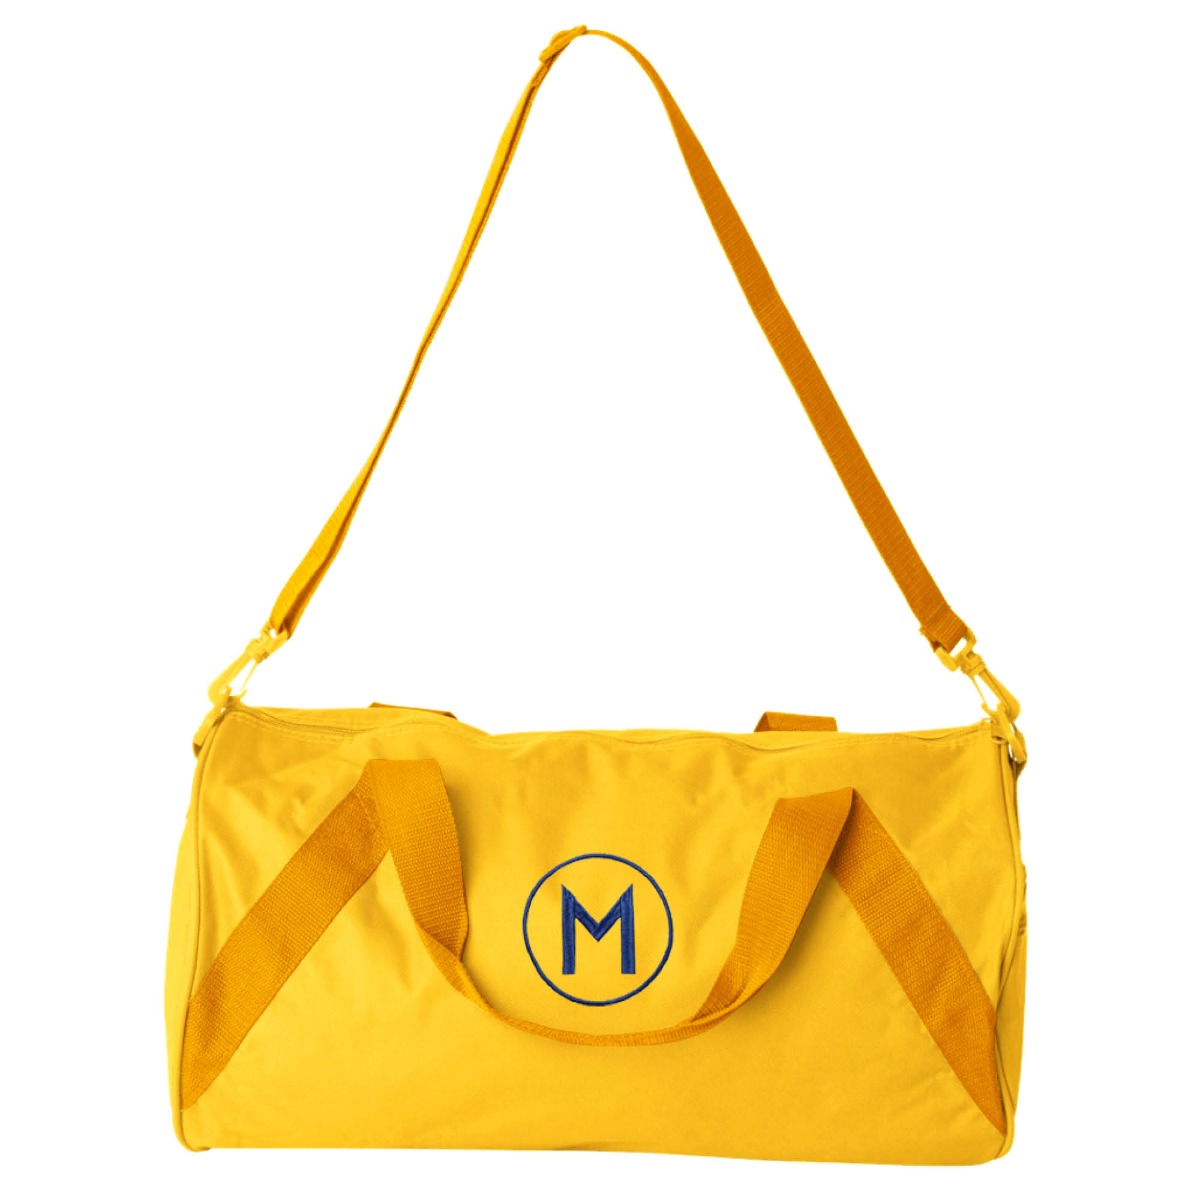 Embroidered Circle Initial Yellow Duffle Bag